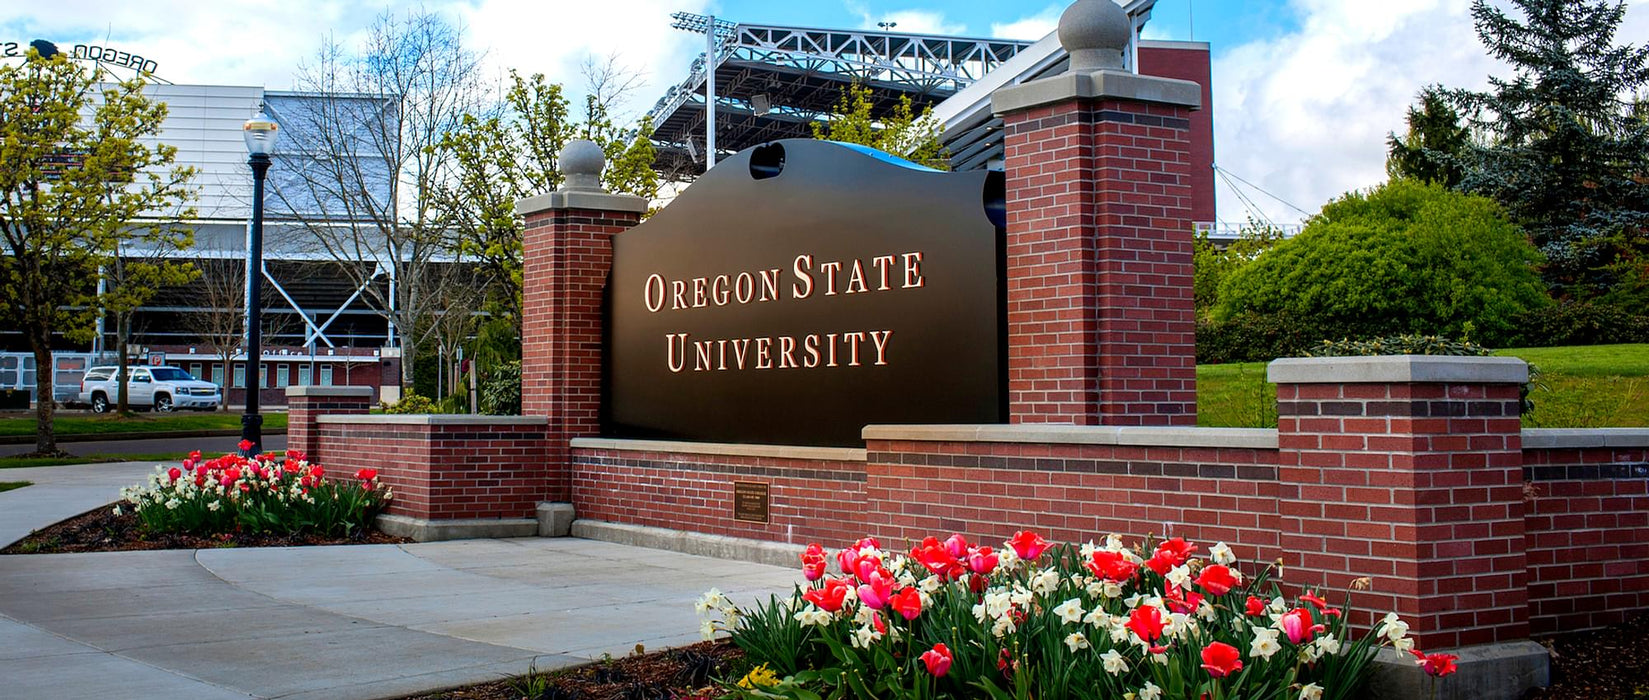 International Year One - Undergraduate Pathway - Science (4-Semester Pathway) Transfer to Bachelor of Science - Agricultural Sciences at Oregon State University - Corvallis: Tuition: $39,300.00 USD/year (Scholarship Available)